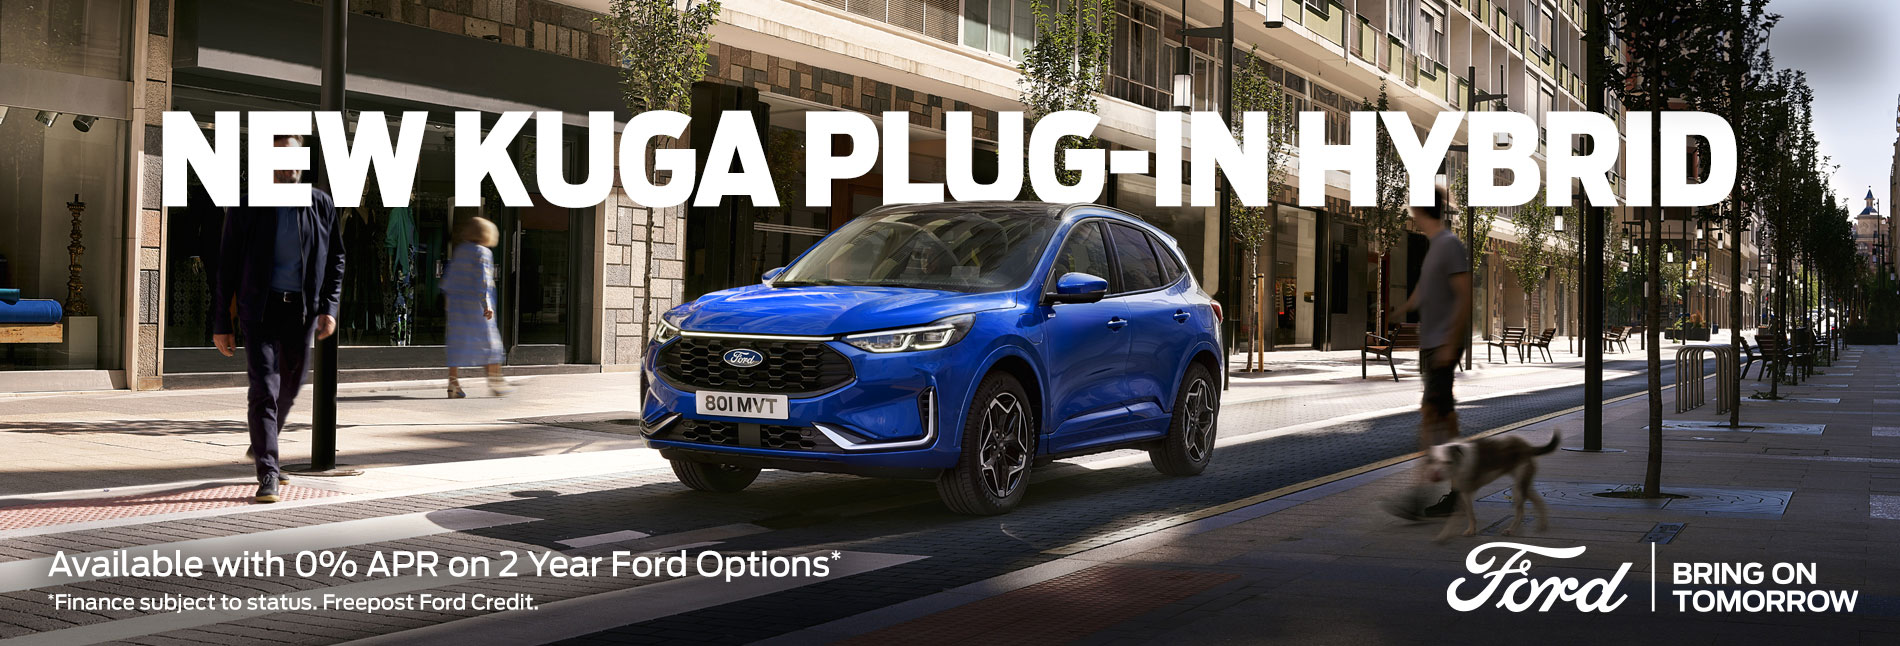 New Kuga PHEV with 0% APR on 2 Year Ford Options